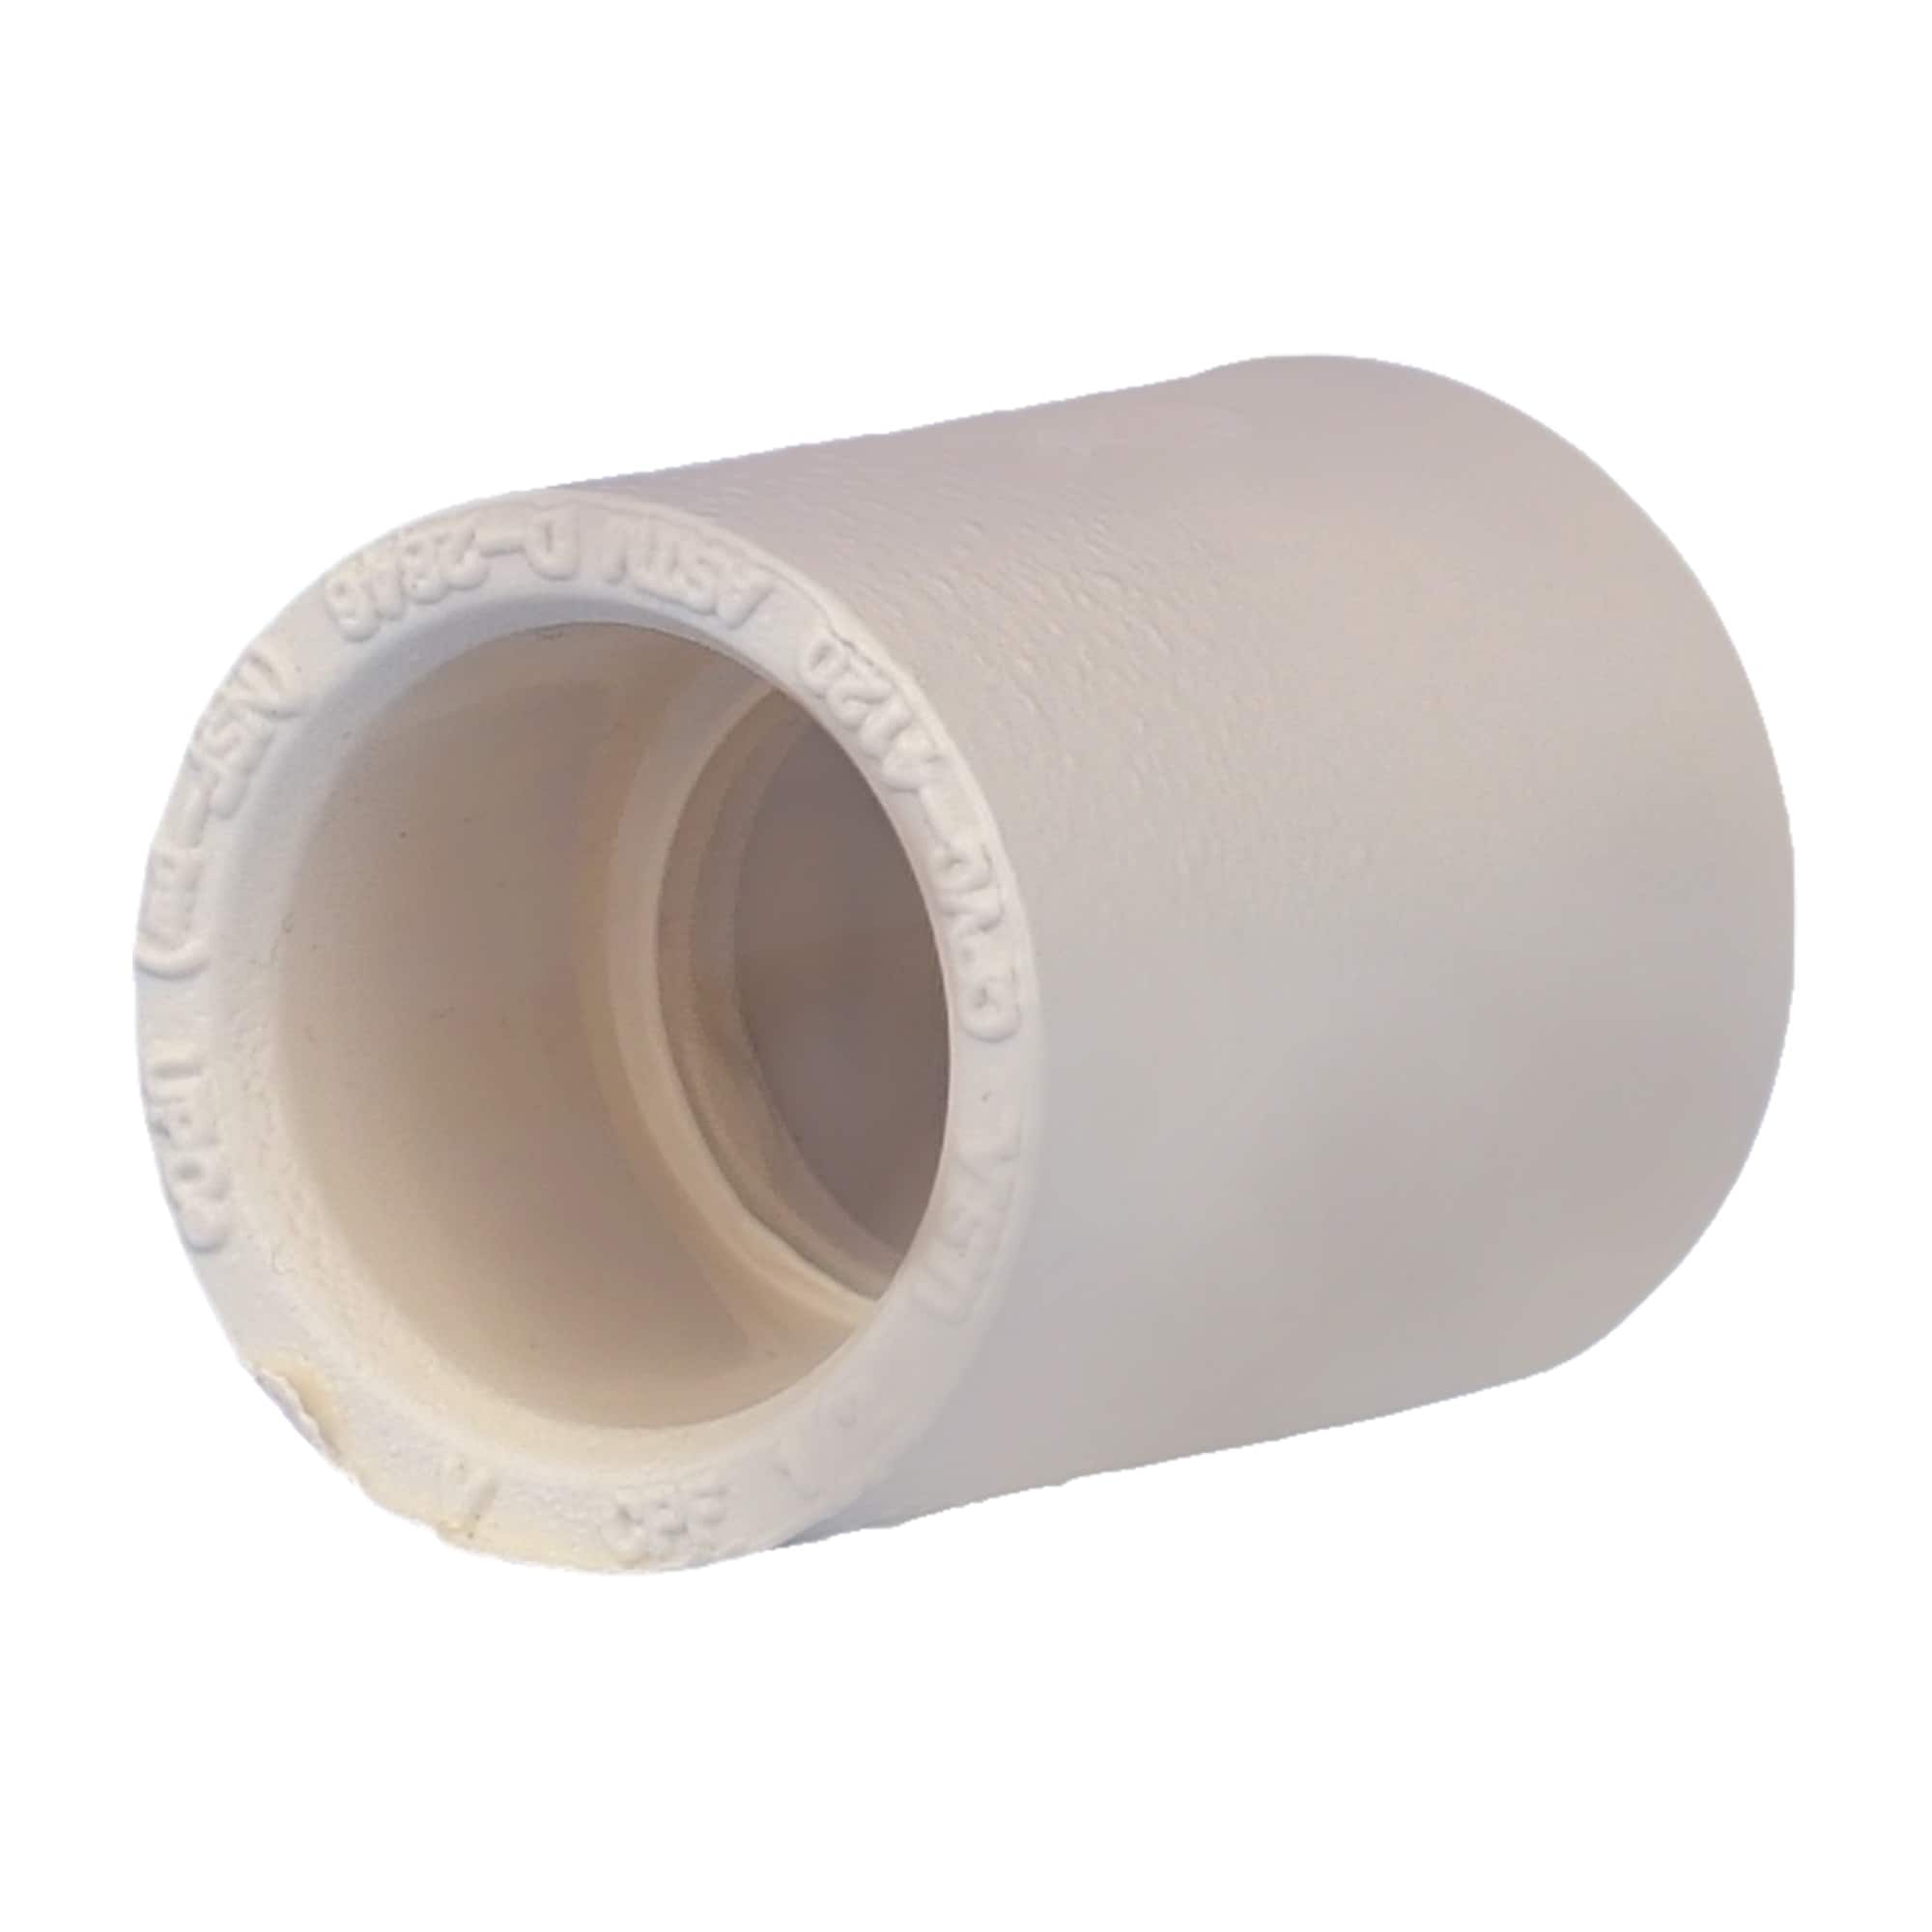 Charlotte Pipe 1-in CPVC Coupling for Potable Water Distribution, Cream Color, 100 PSI, NSF Approved, ASTM D1784, ASTM D2846, 1-in Socket Connection -  CTS021001000